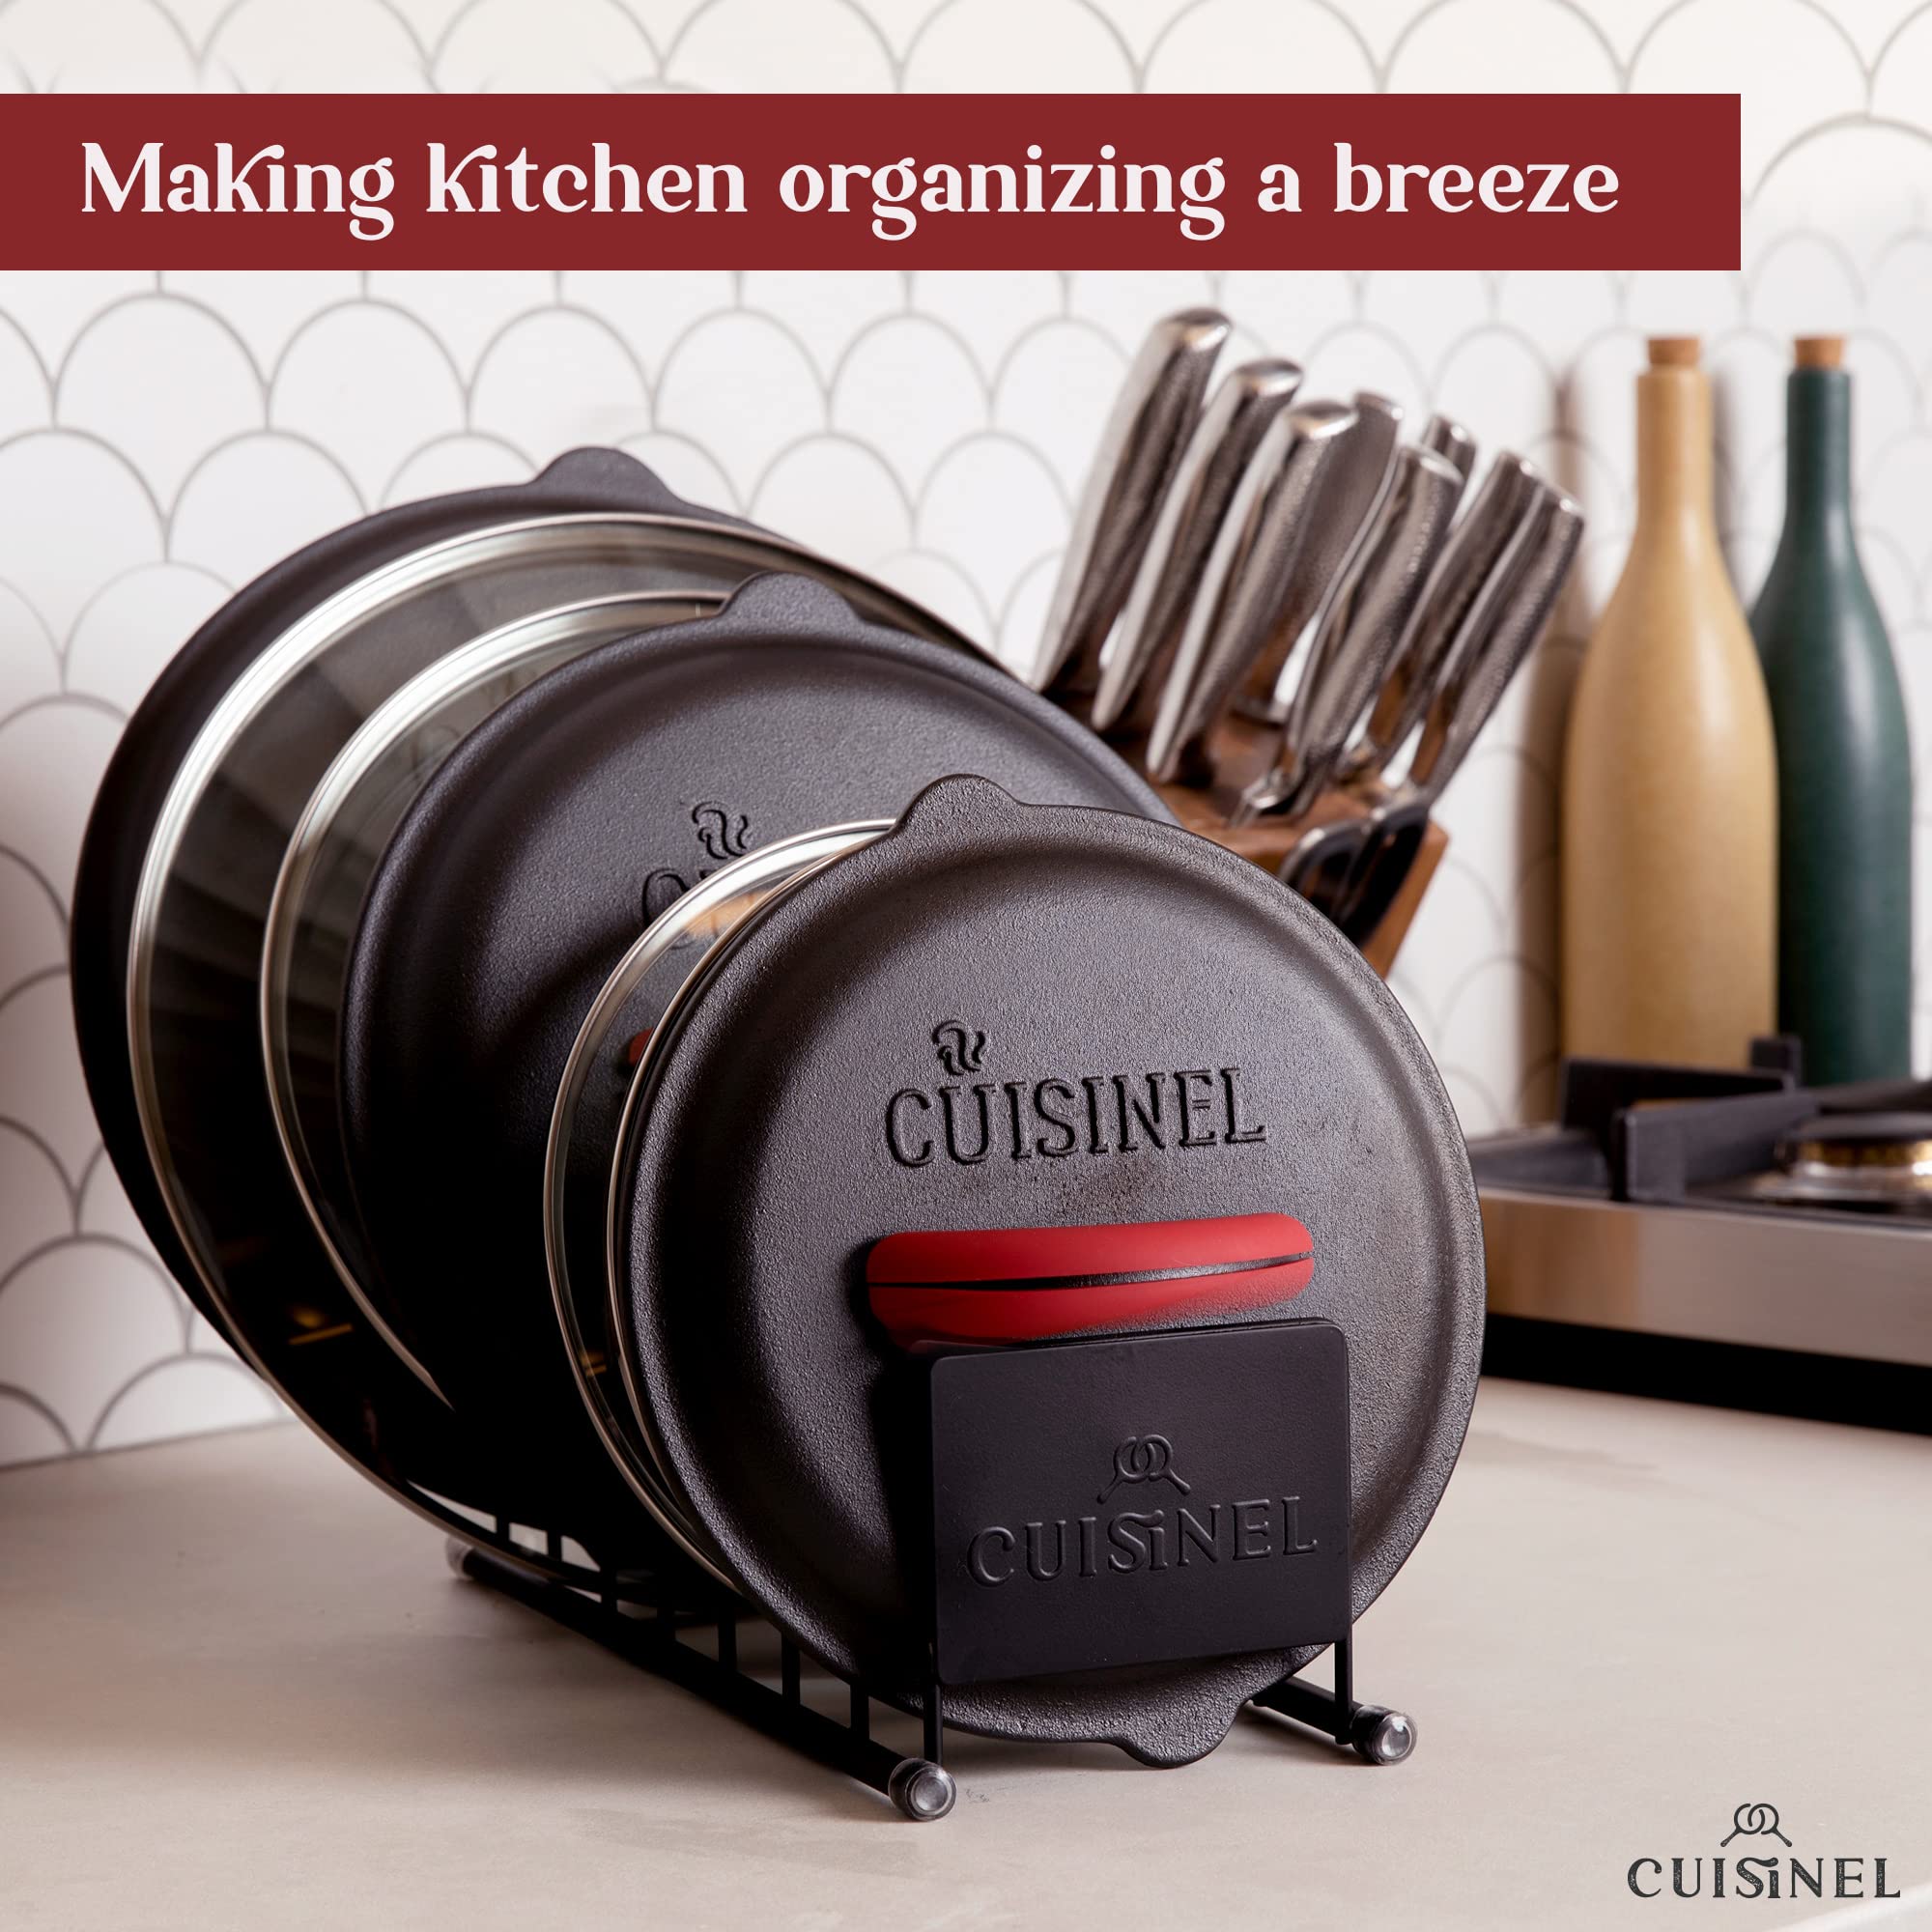 Cuisinel Heavy Duty Pan Organizer, 5 Tier Rack - Holds up to 50 LB - Holds Cast Iron Skillets, Griddles and Shallow Pots - Durable Steel Construction - Space Saving Kitchen Storage  - Like New